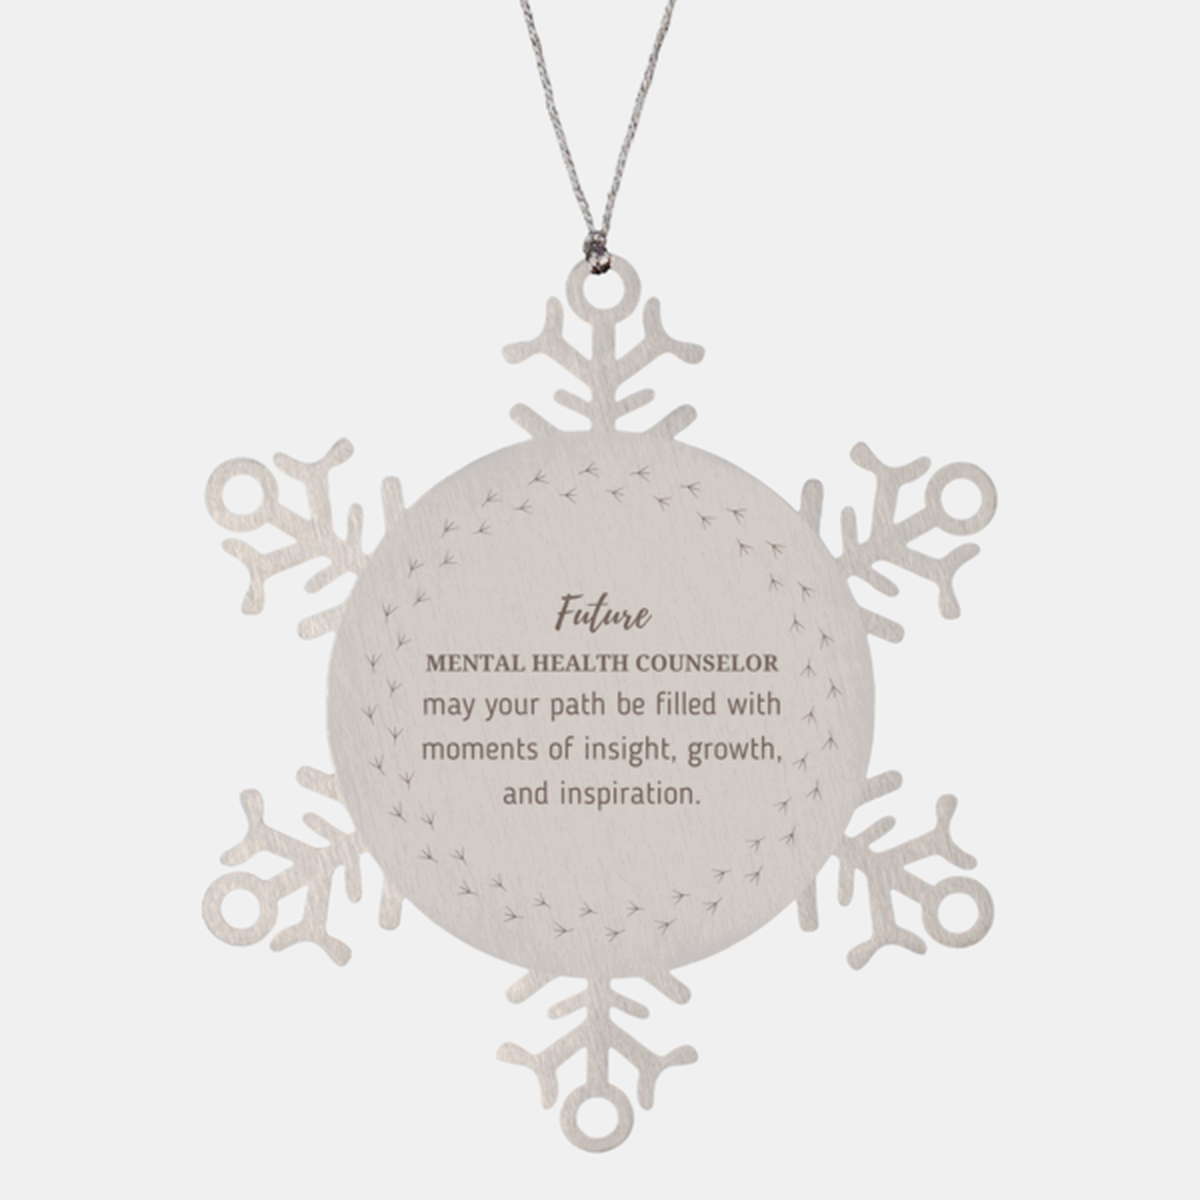 Future Mental Health Counselor Gifts, May your path be filled with moments of insight, Graduation Gifts for New Mental Health Counselor, Christmas Unique Snowflake Ornament For Men, Women, Friends